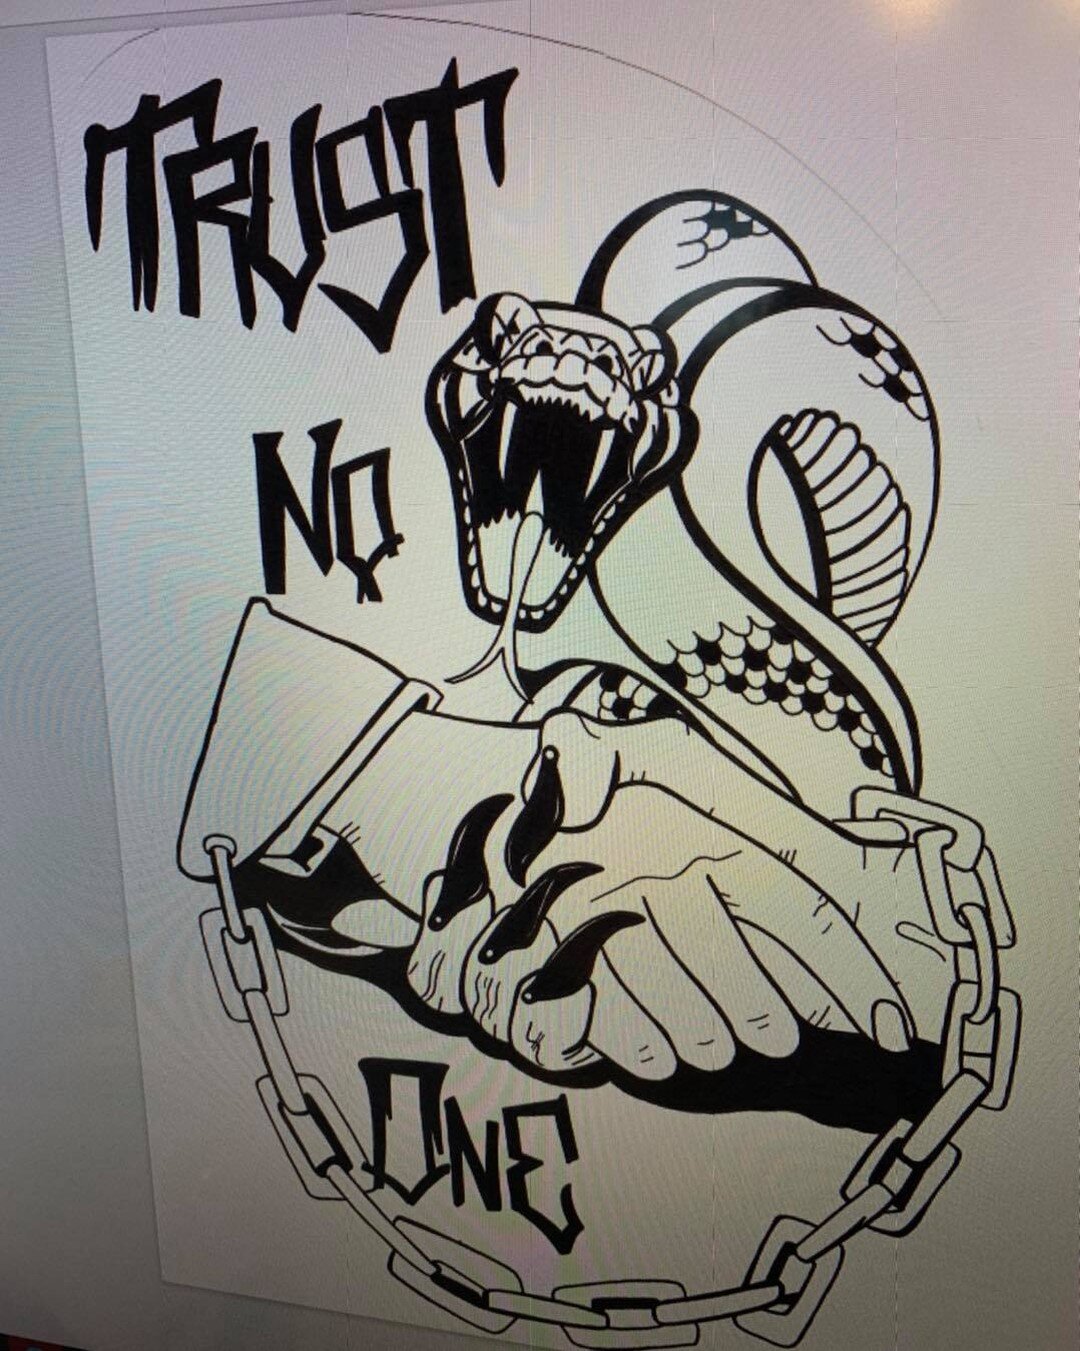 Well even tho we have been slacking on posting our work on here! There has been a lot going on still we have been working with a local artist to start making shits and hats to sell of our own stuff, this will be the first design ran what does everyon